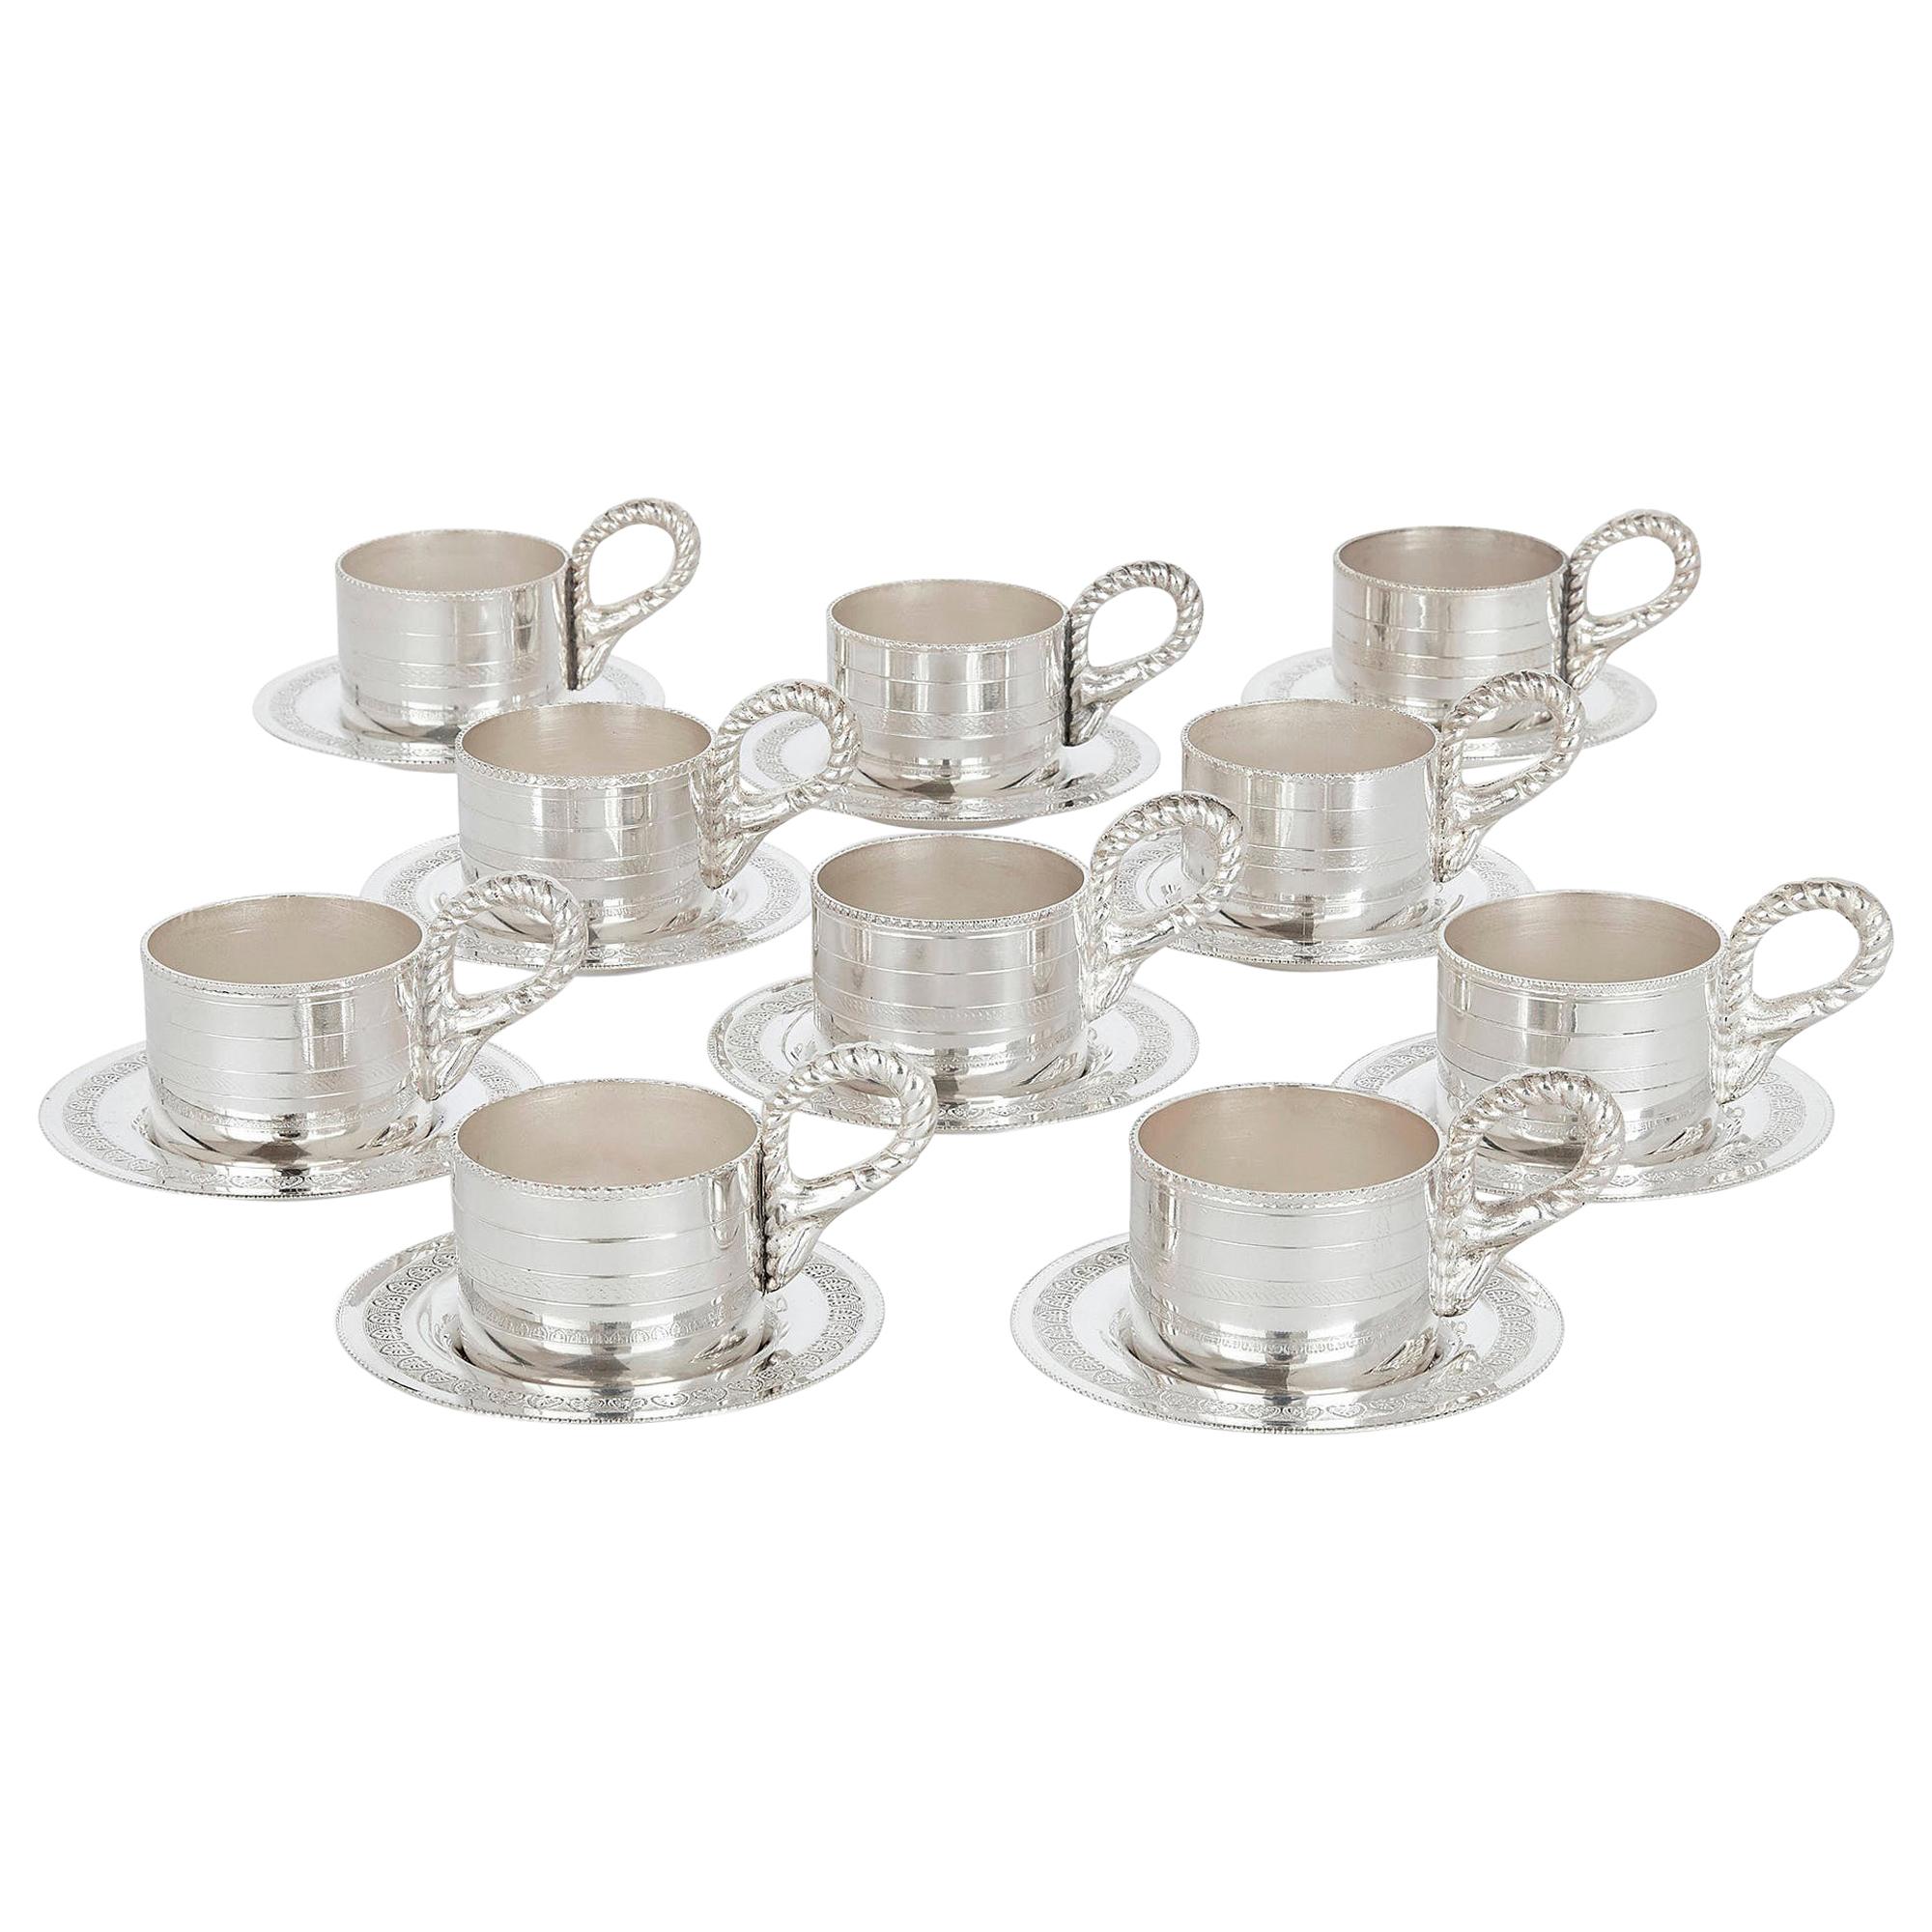 Set of Ten Lebanese Silver Plate Cups and Saucers by Habis